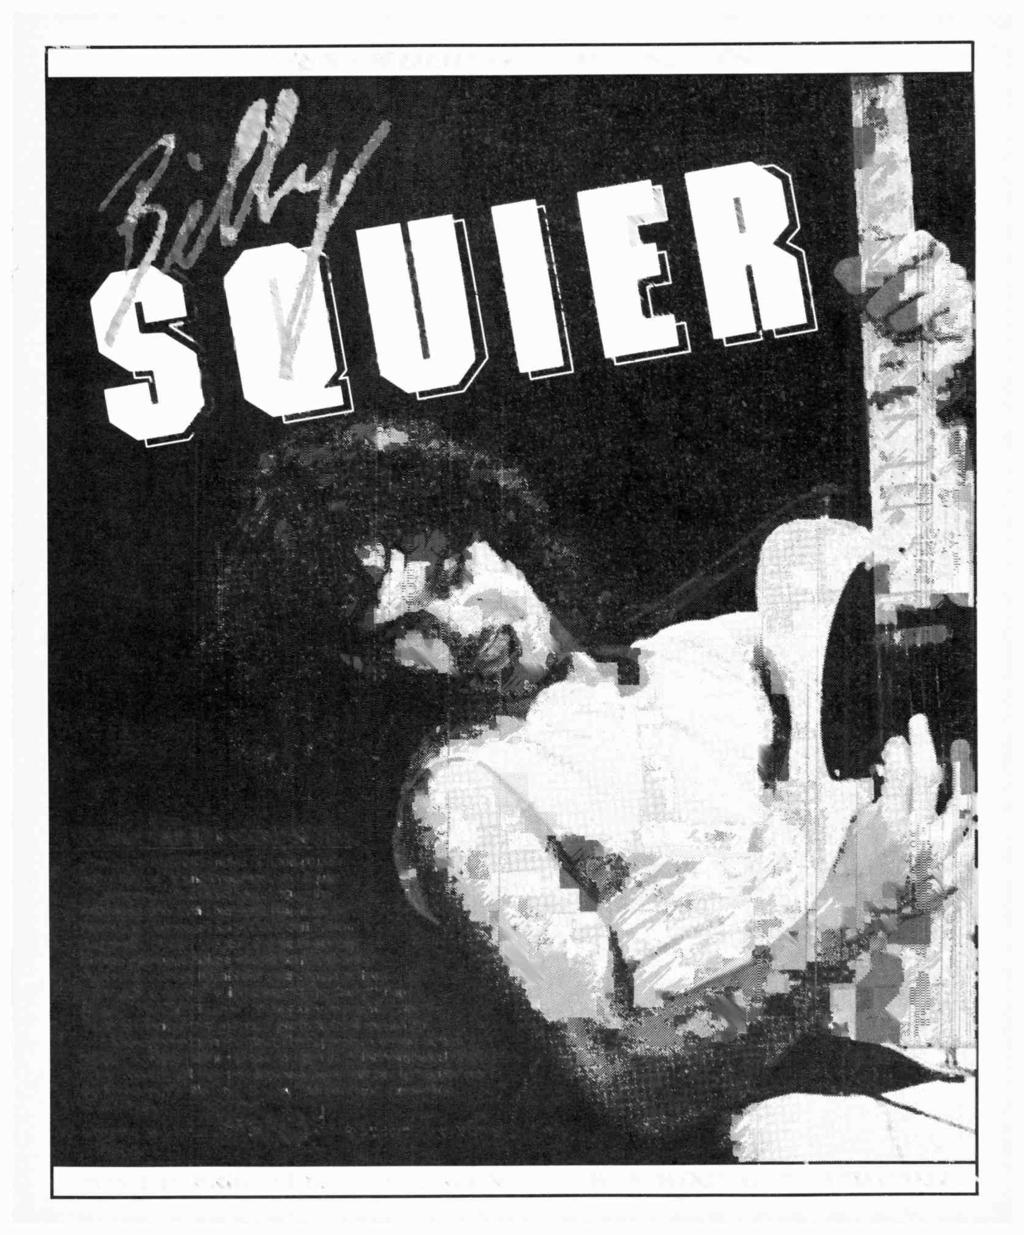 P1ESTII/0013 ONE PRESENTS SUPERSTAR CONCERT SERIES proudly presents 9C miiutes of bone-orunching rock & roll by singer/cuitanst Billy Scuier the weekend of SaLirday, March 30 on